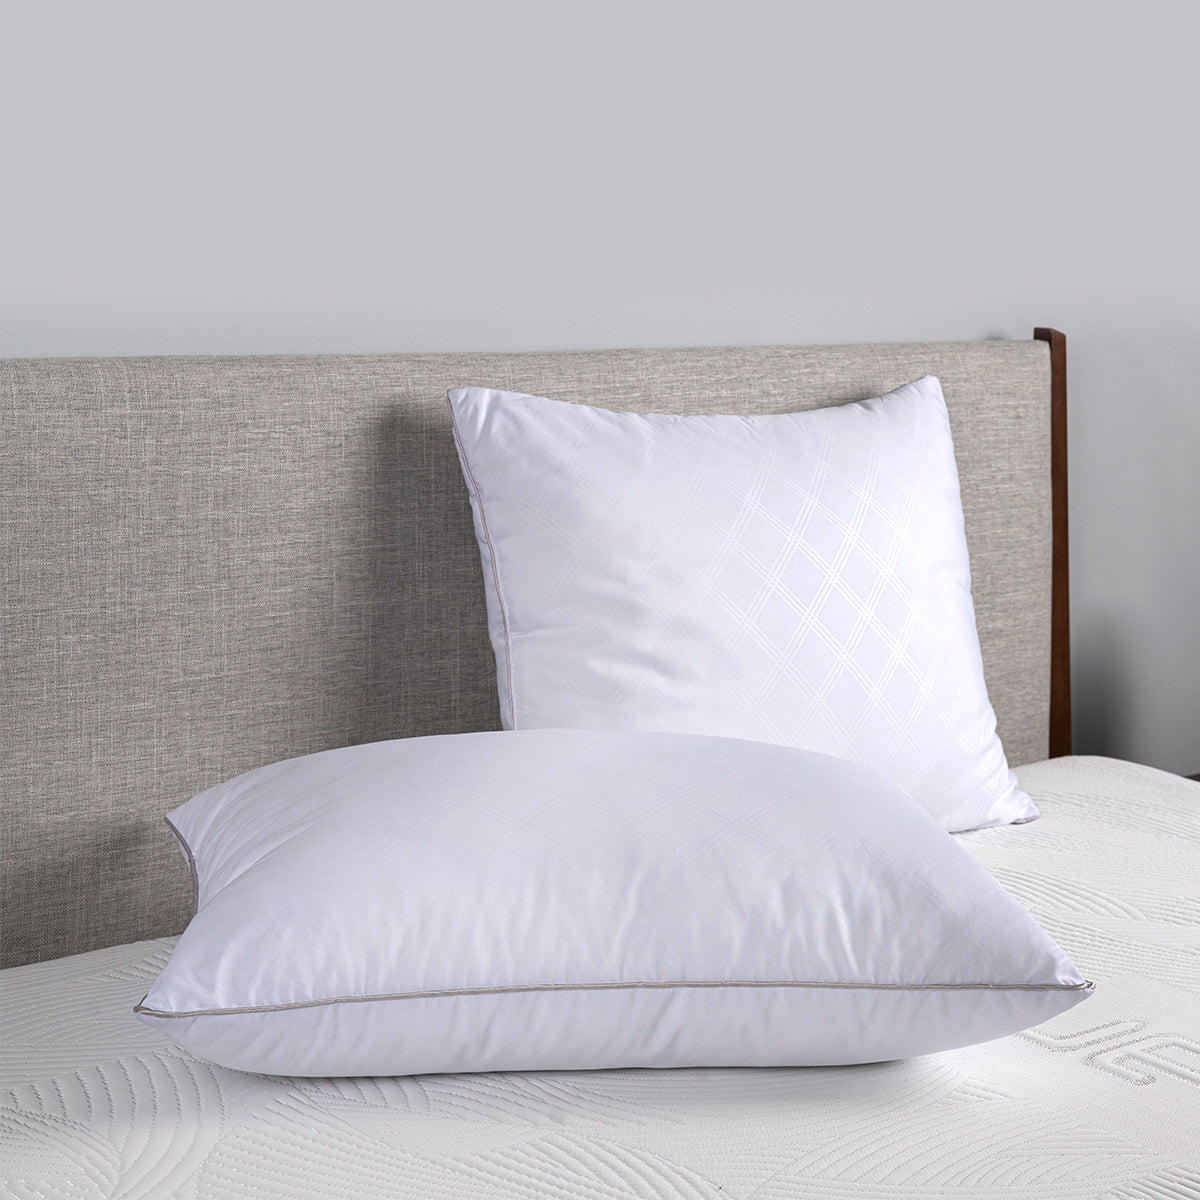 Bedgear Arbor Pillows on bed